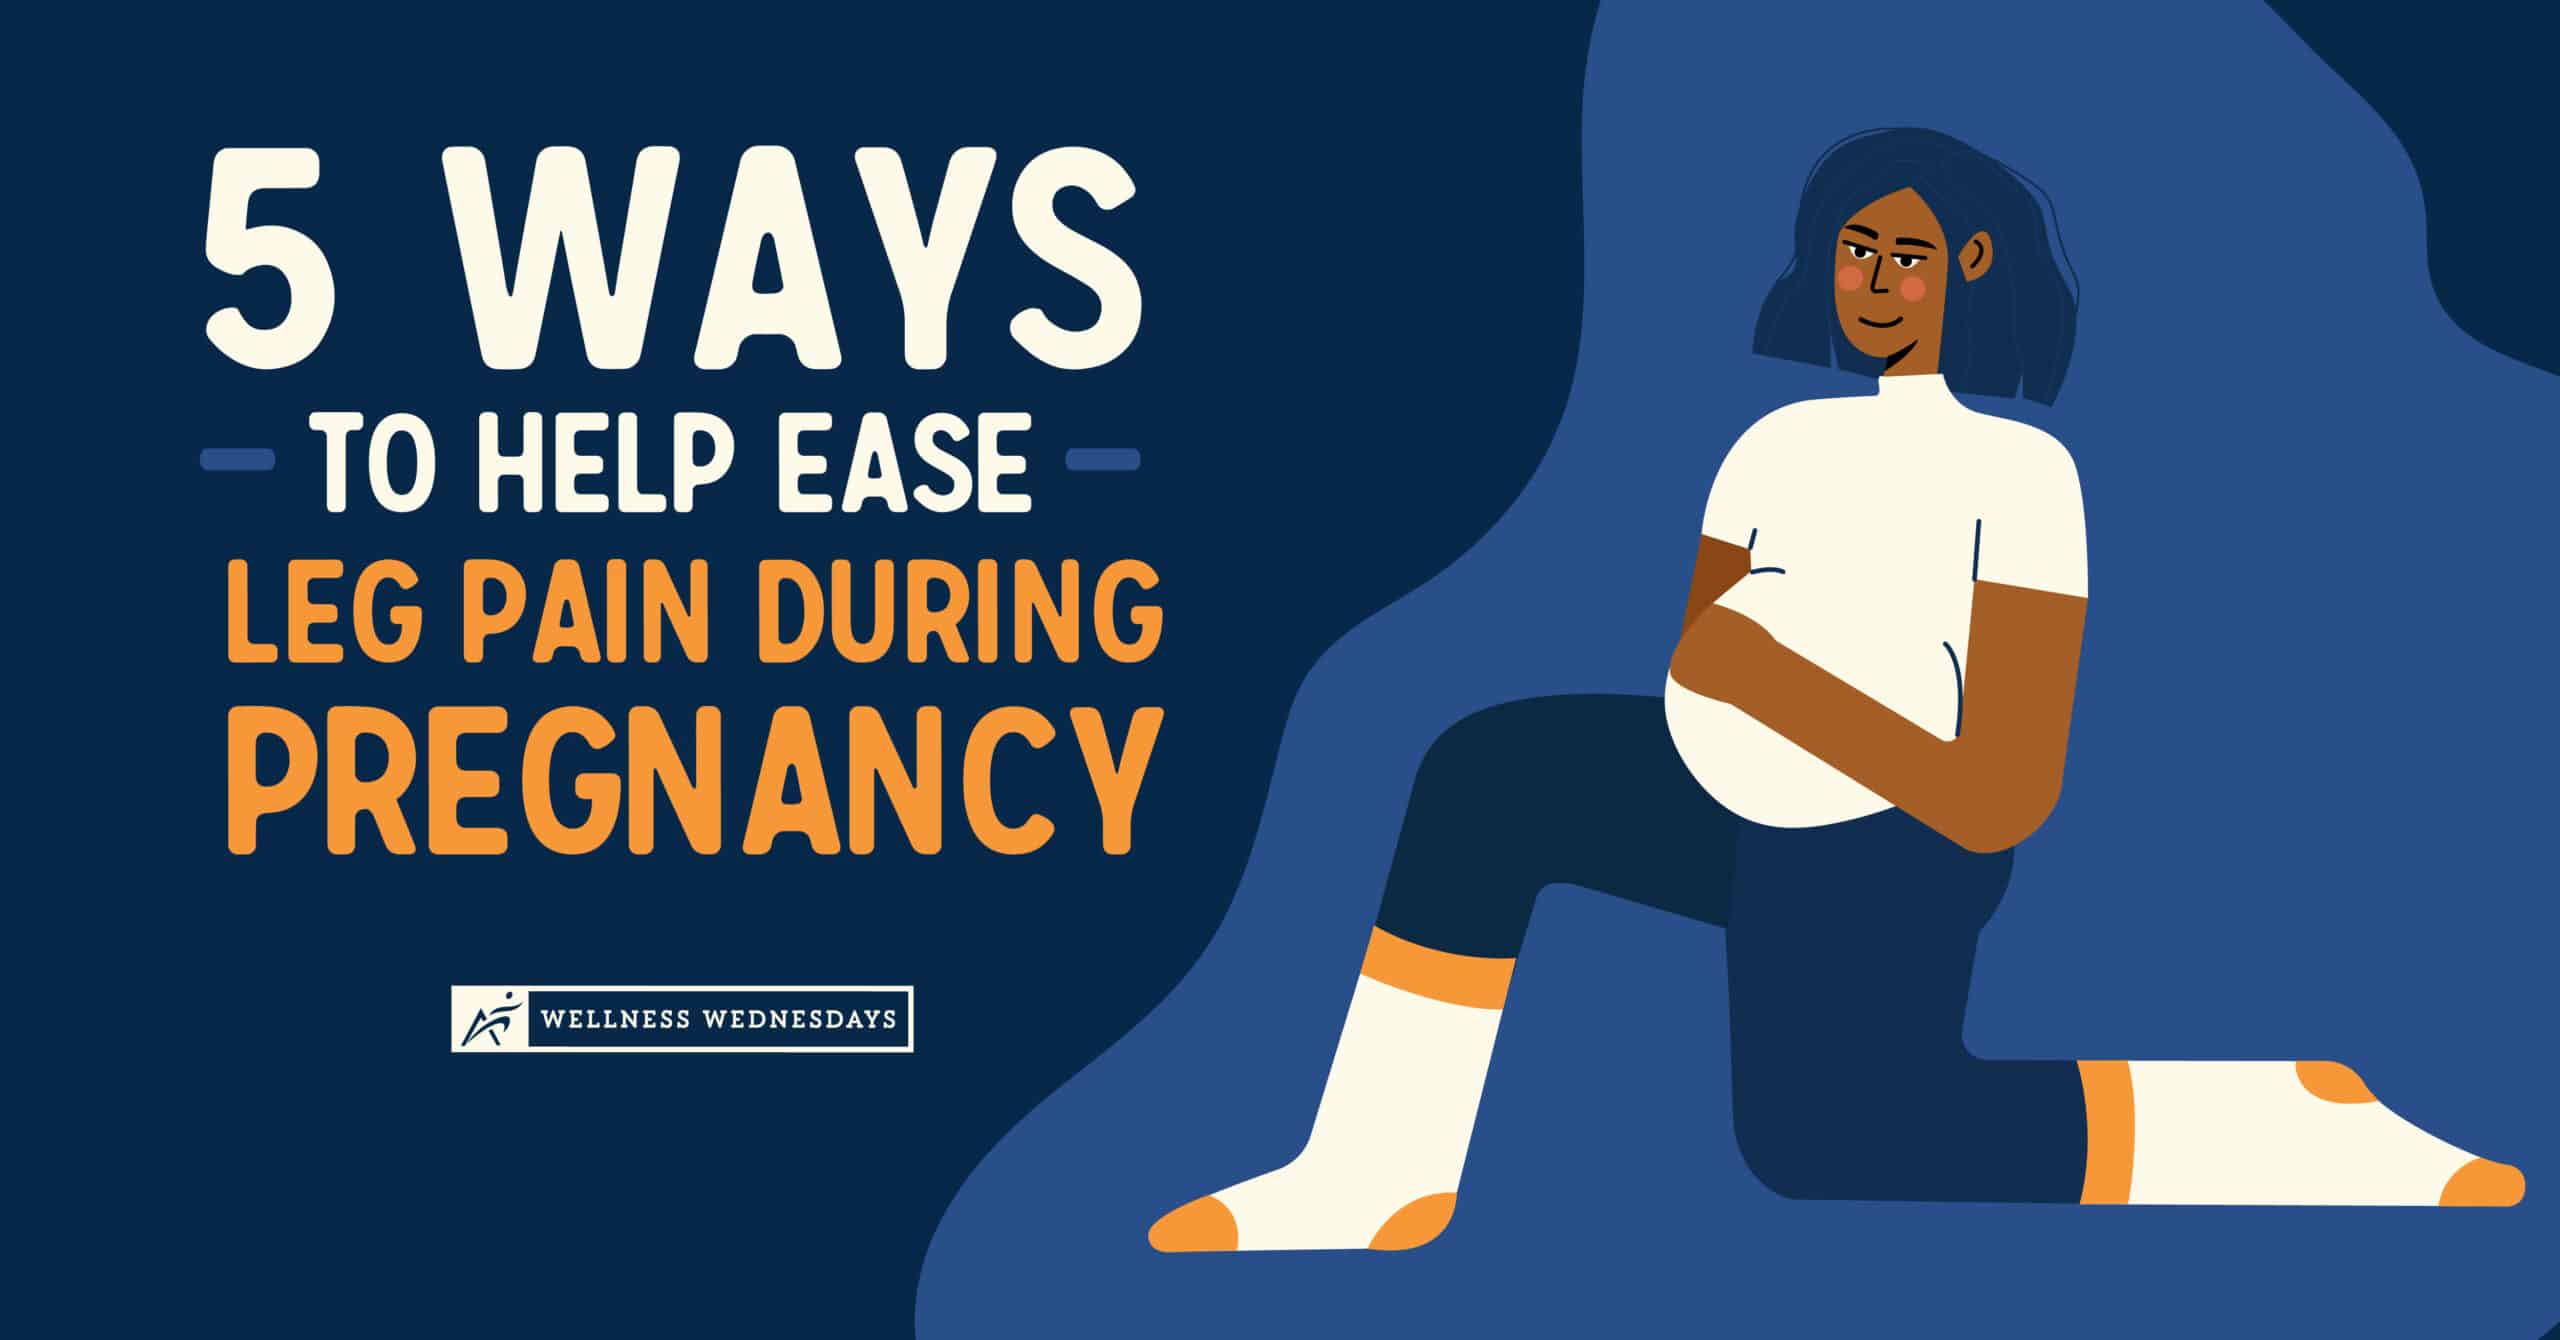 5 Ways to Help Ease Leg Pain During Pregnancy